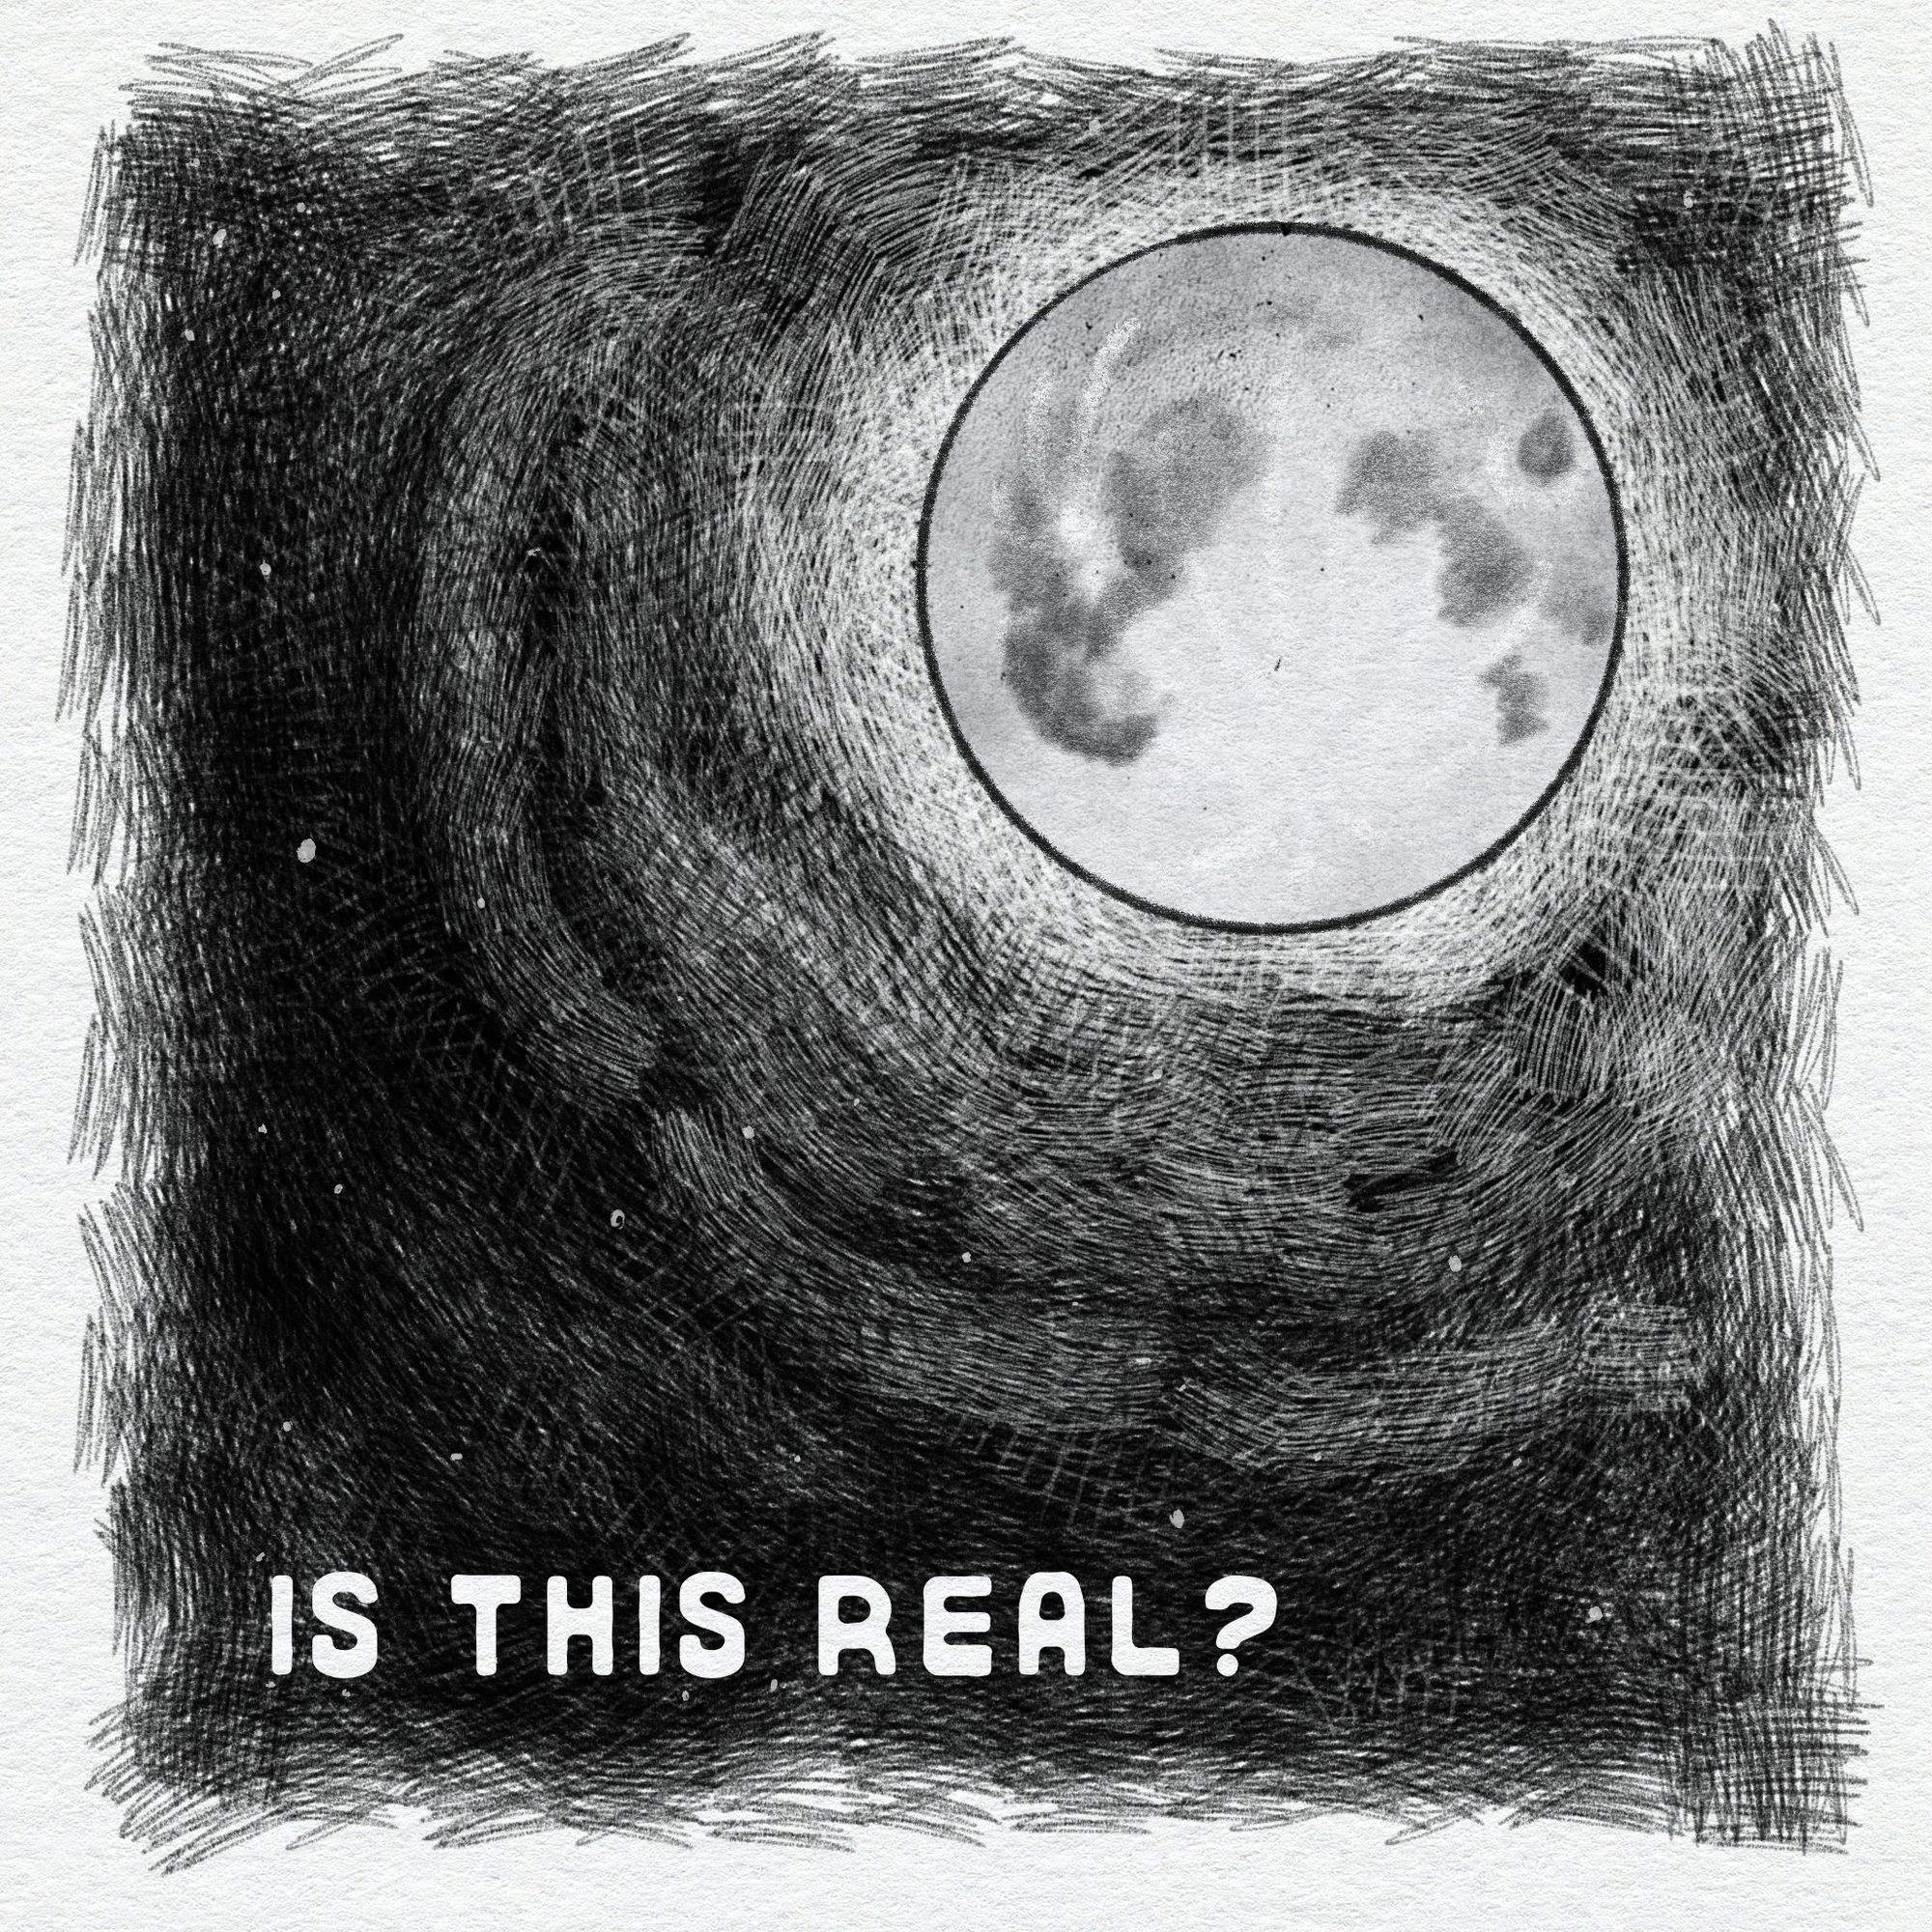 graphite-style digital sketch of the full moon with the words "is this real?"